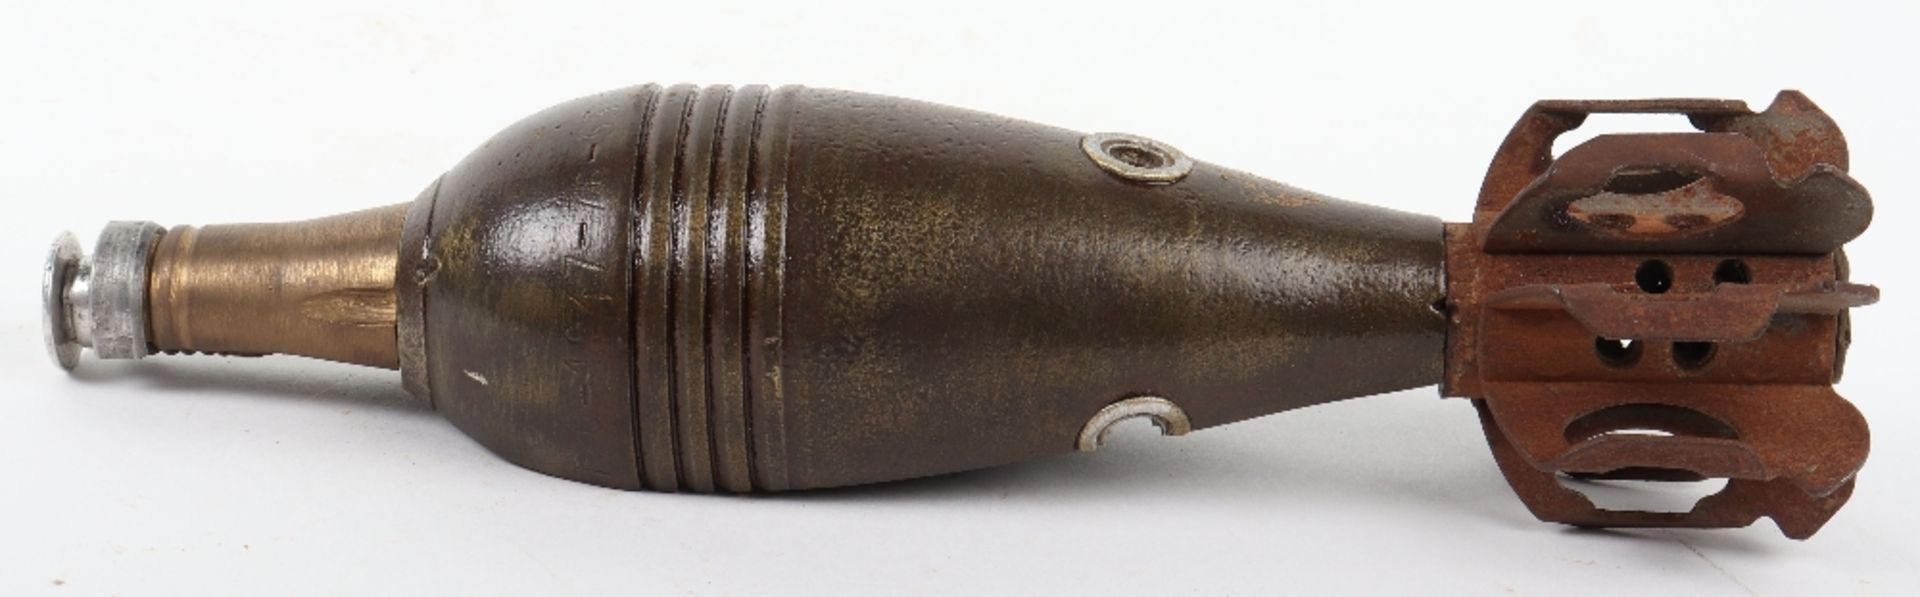 Scarce Inert WW2 German Sectioned Mortar Round - Image 4 of 7